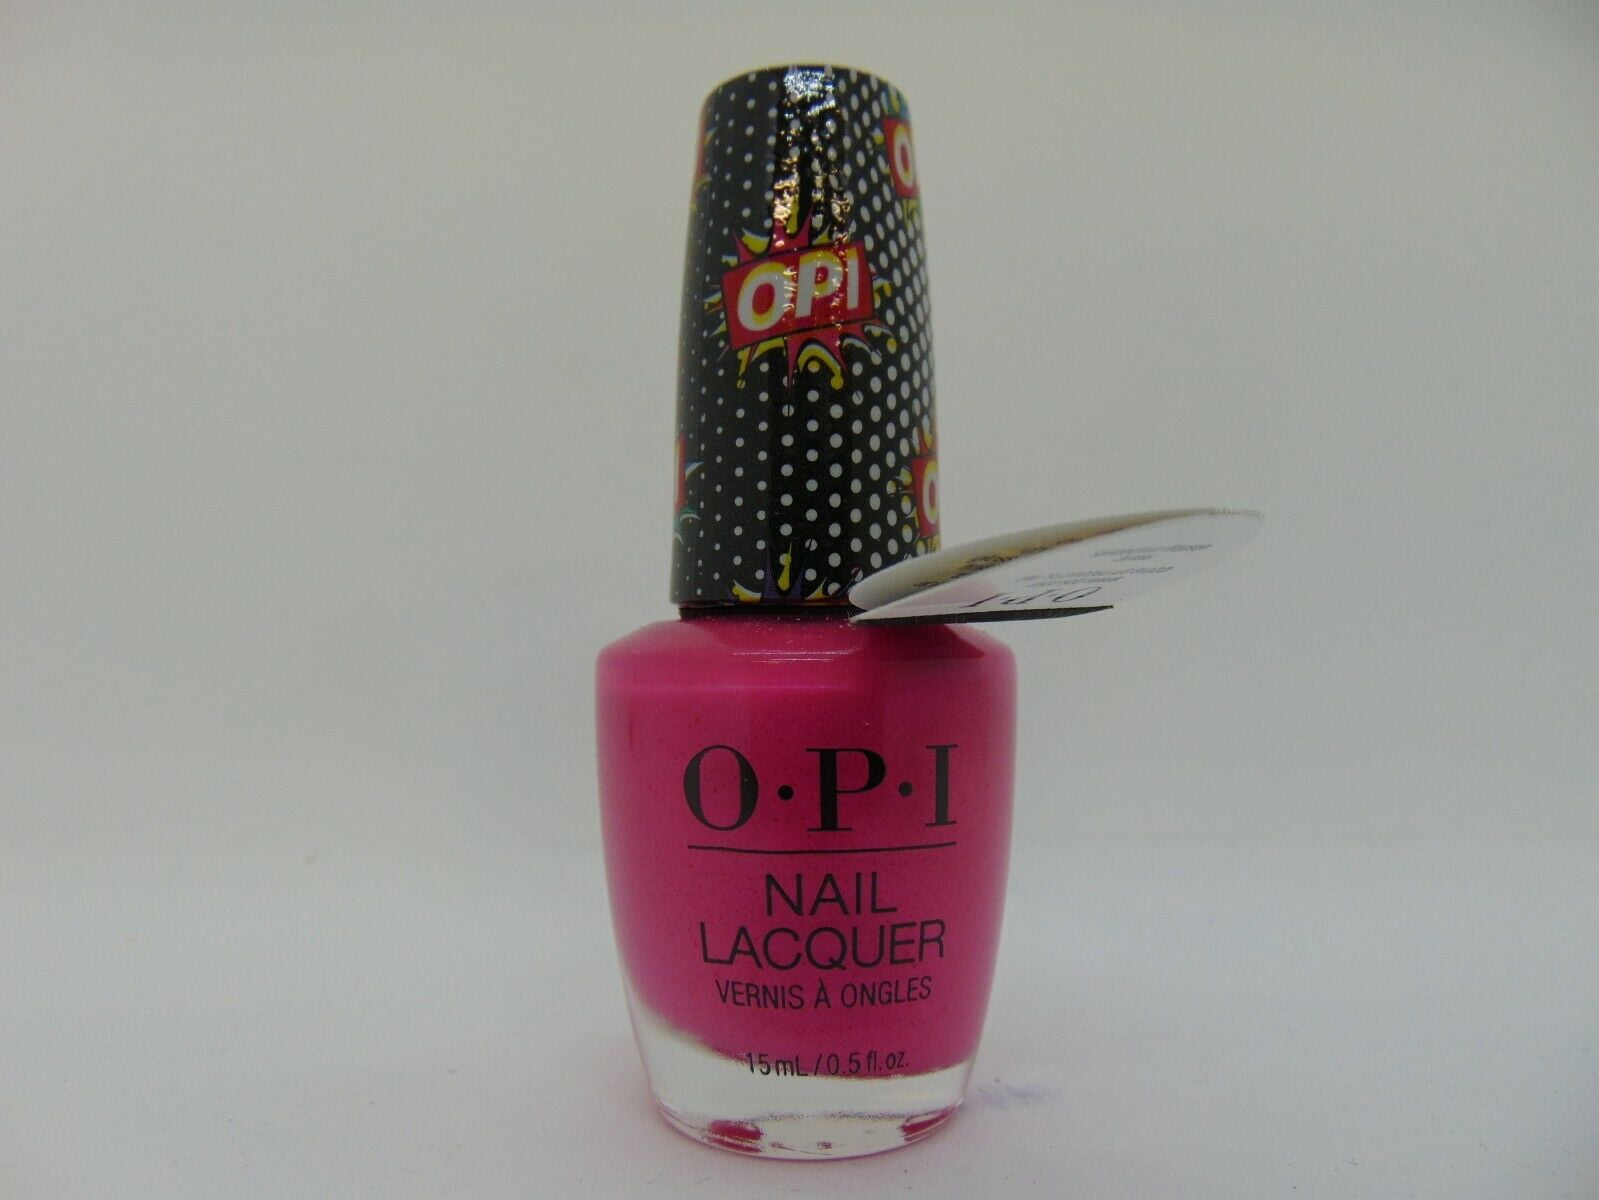 1. OPI Nail Lacquer in "Cream of the Crop" - wide 6